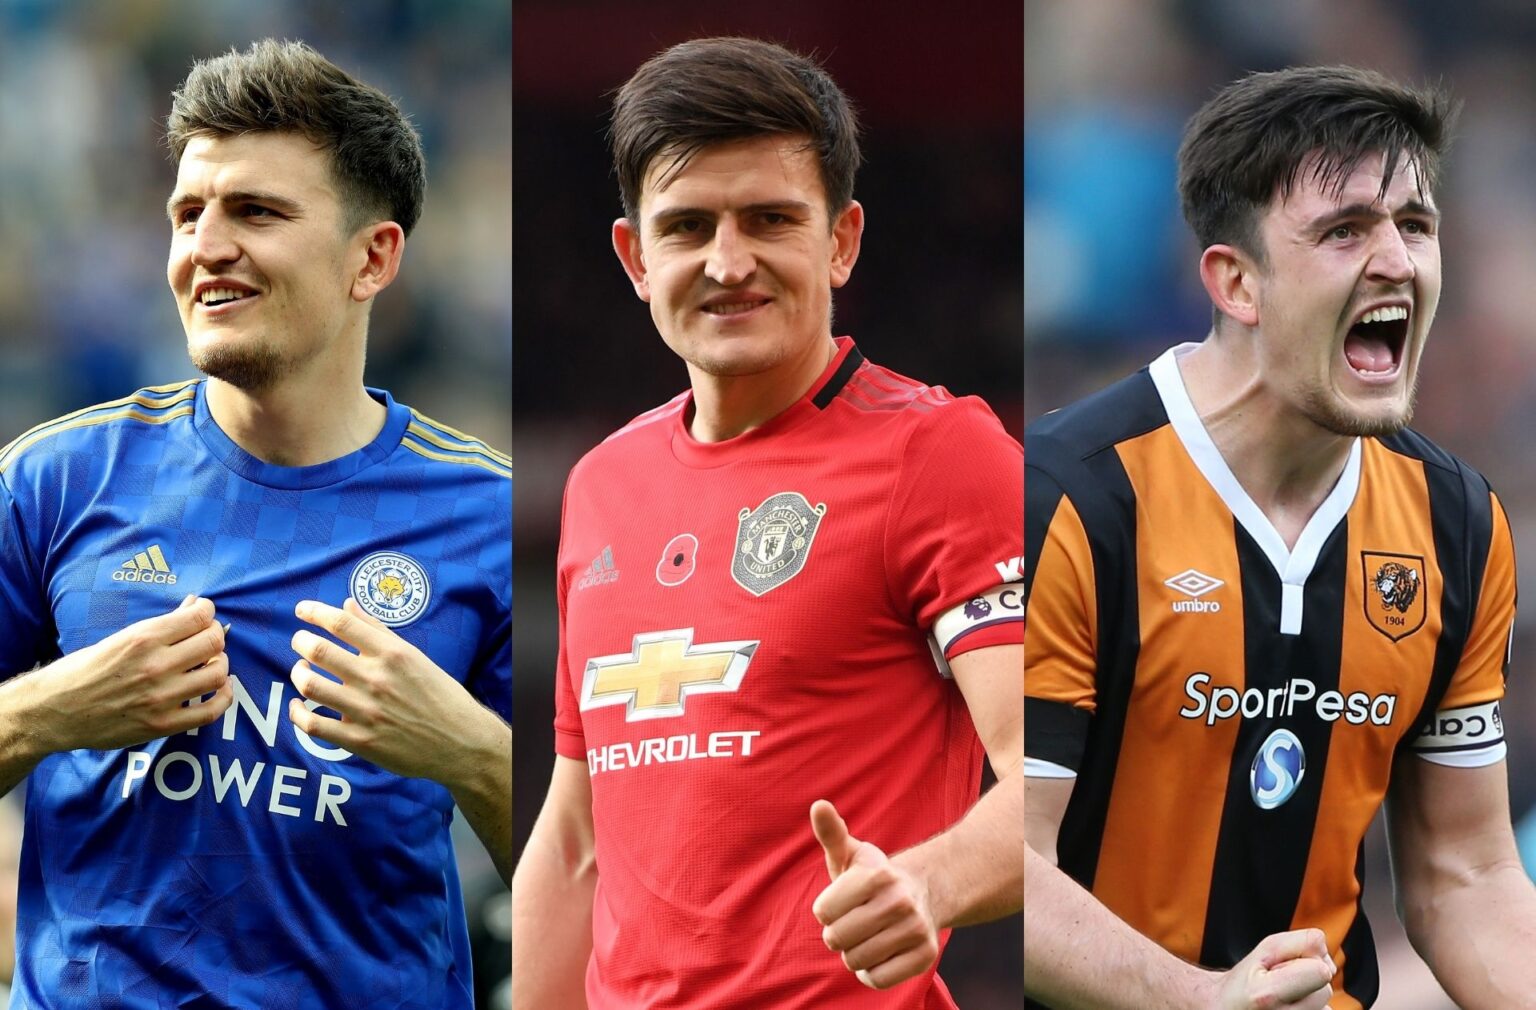 Top 5 career moments of Manchester United captain Harry Maguire